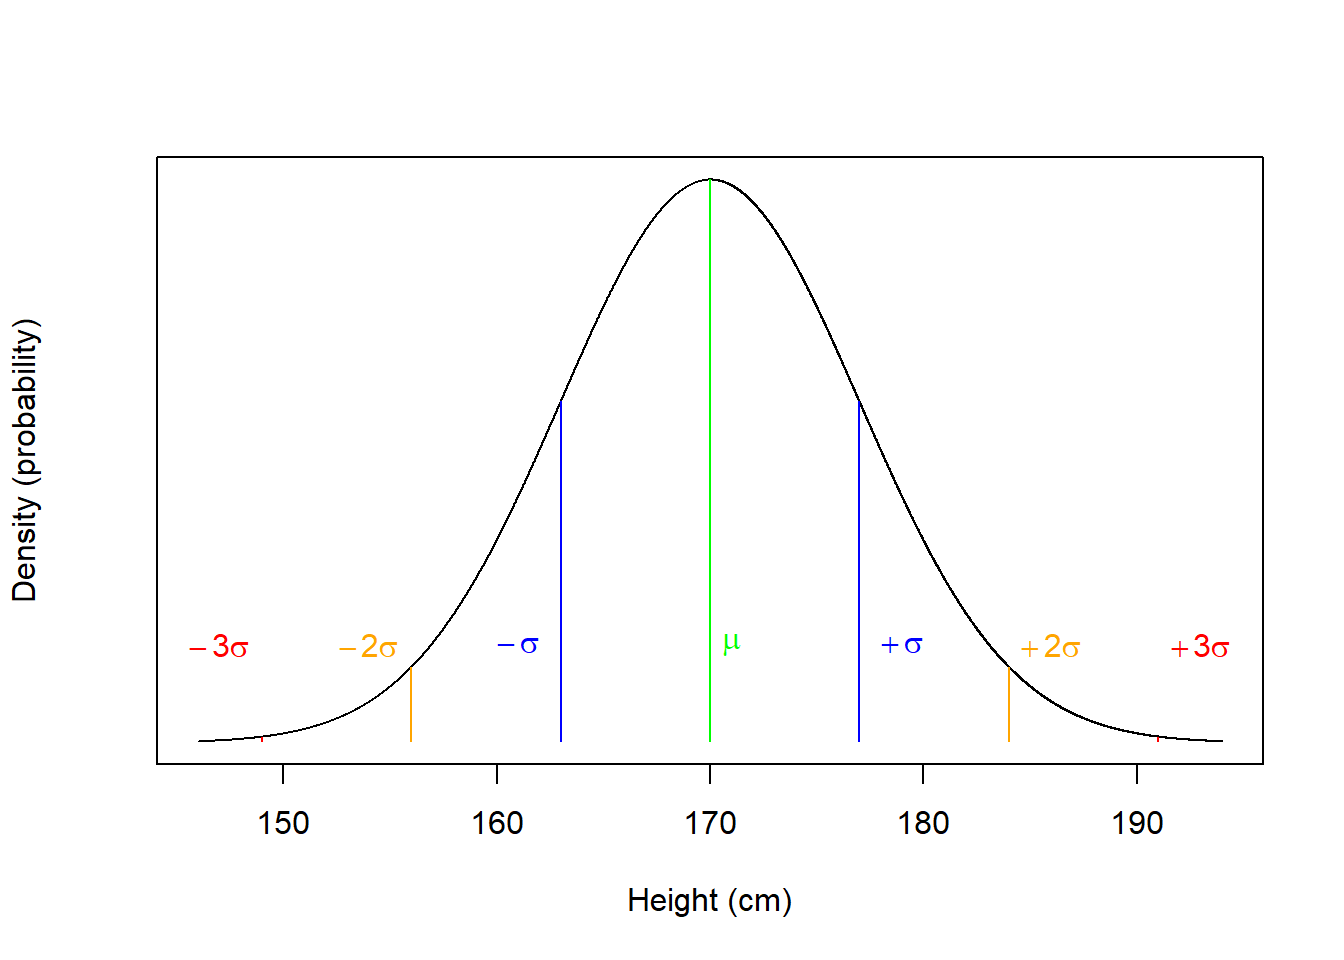 The Normal Distribution of height in Psychology students (black line). Green line represents the mean. Blue line represent 1 Standard Deviation from the mean. Yellow line represents 2 Standard Deviation from the mean. Red line represents 3 Standard Deviation from the mean.